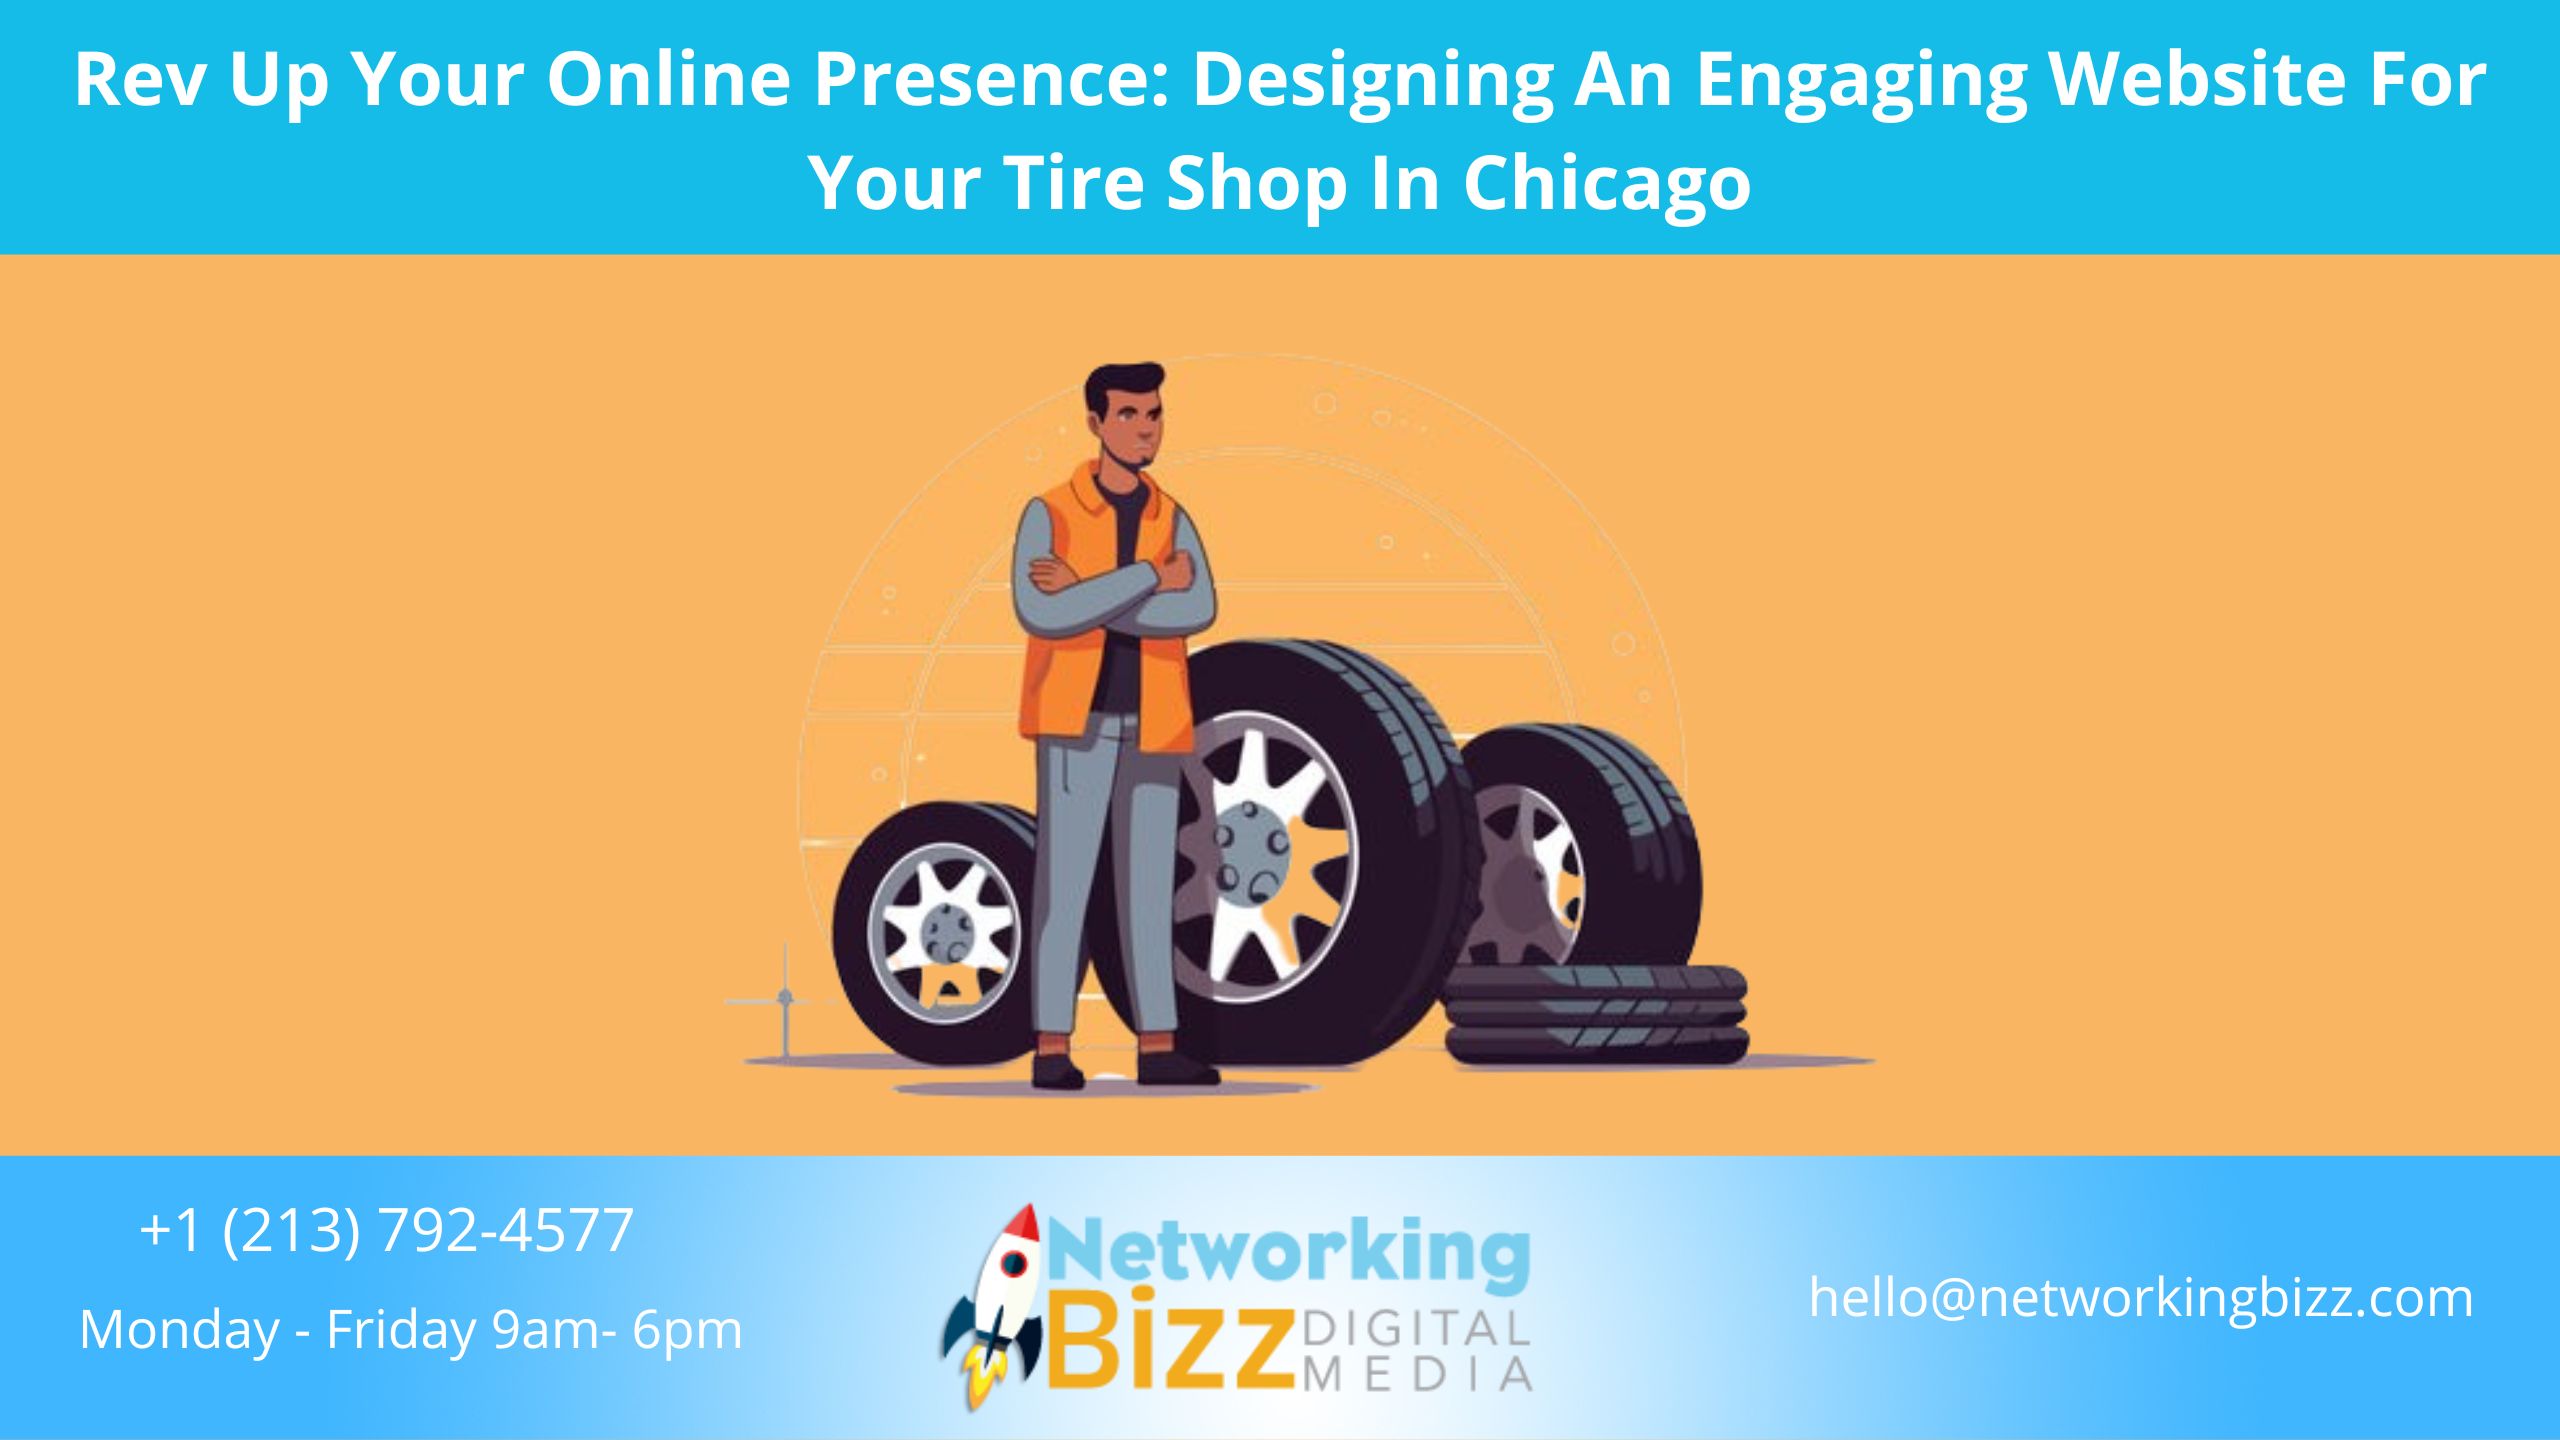 Rev Up Your Online Presence: Designing An Engaging Website For Your Tire Shop In Chicago